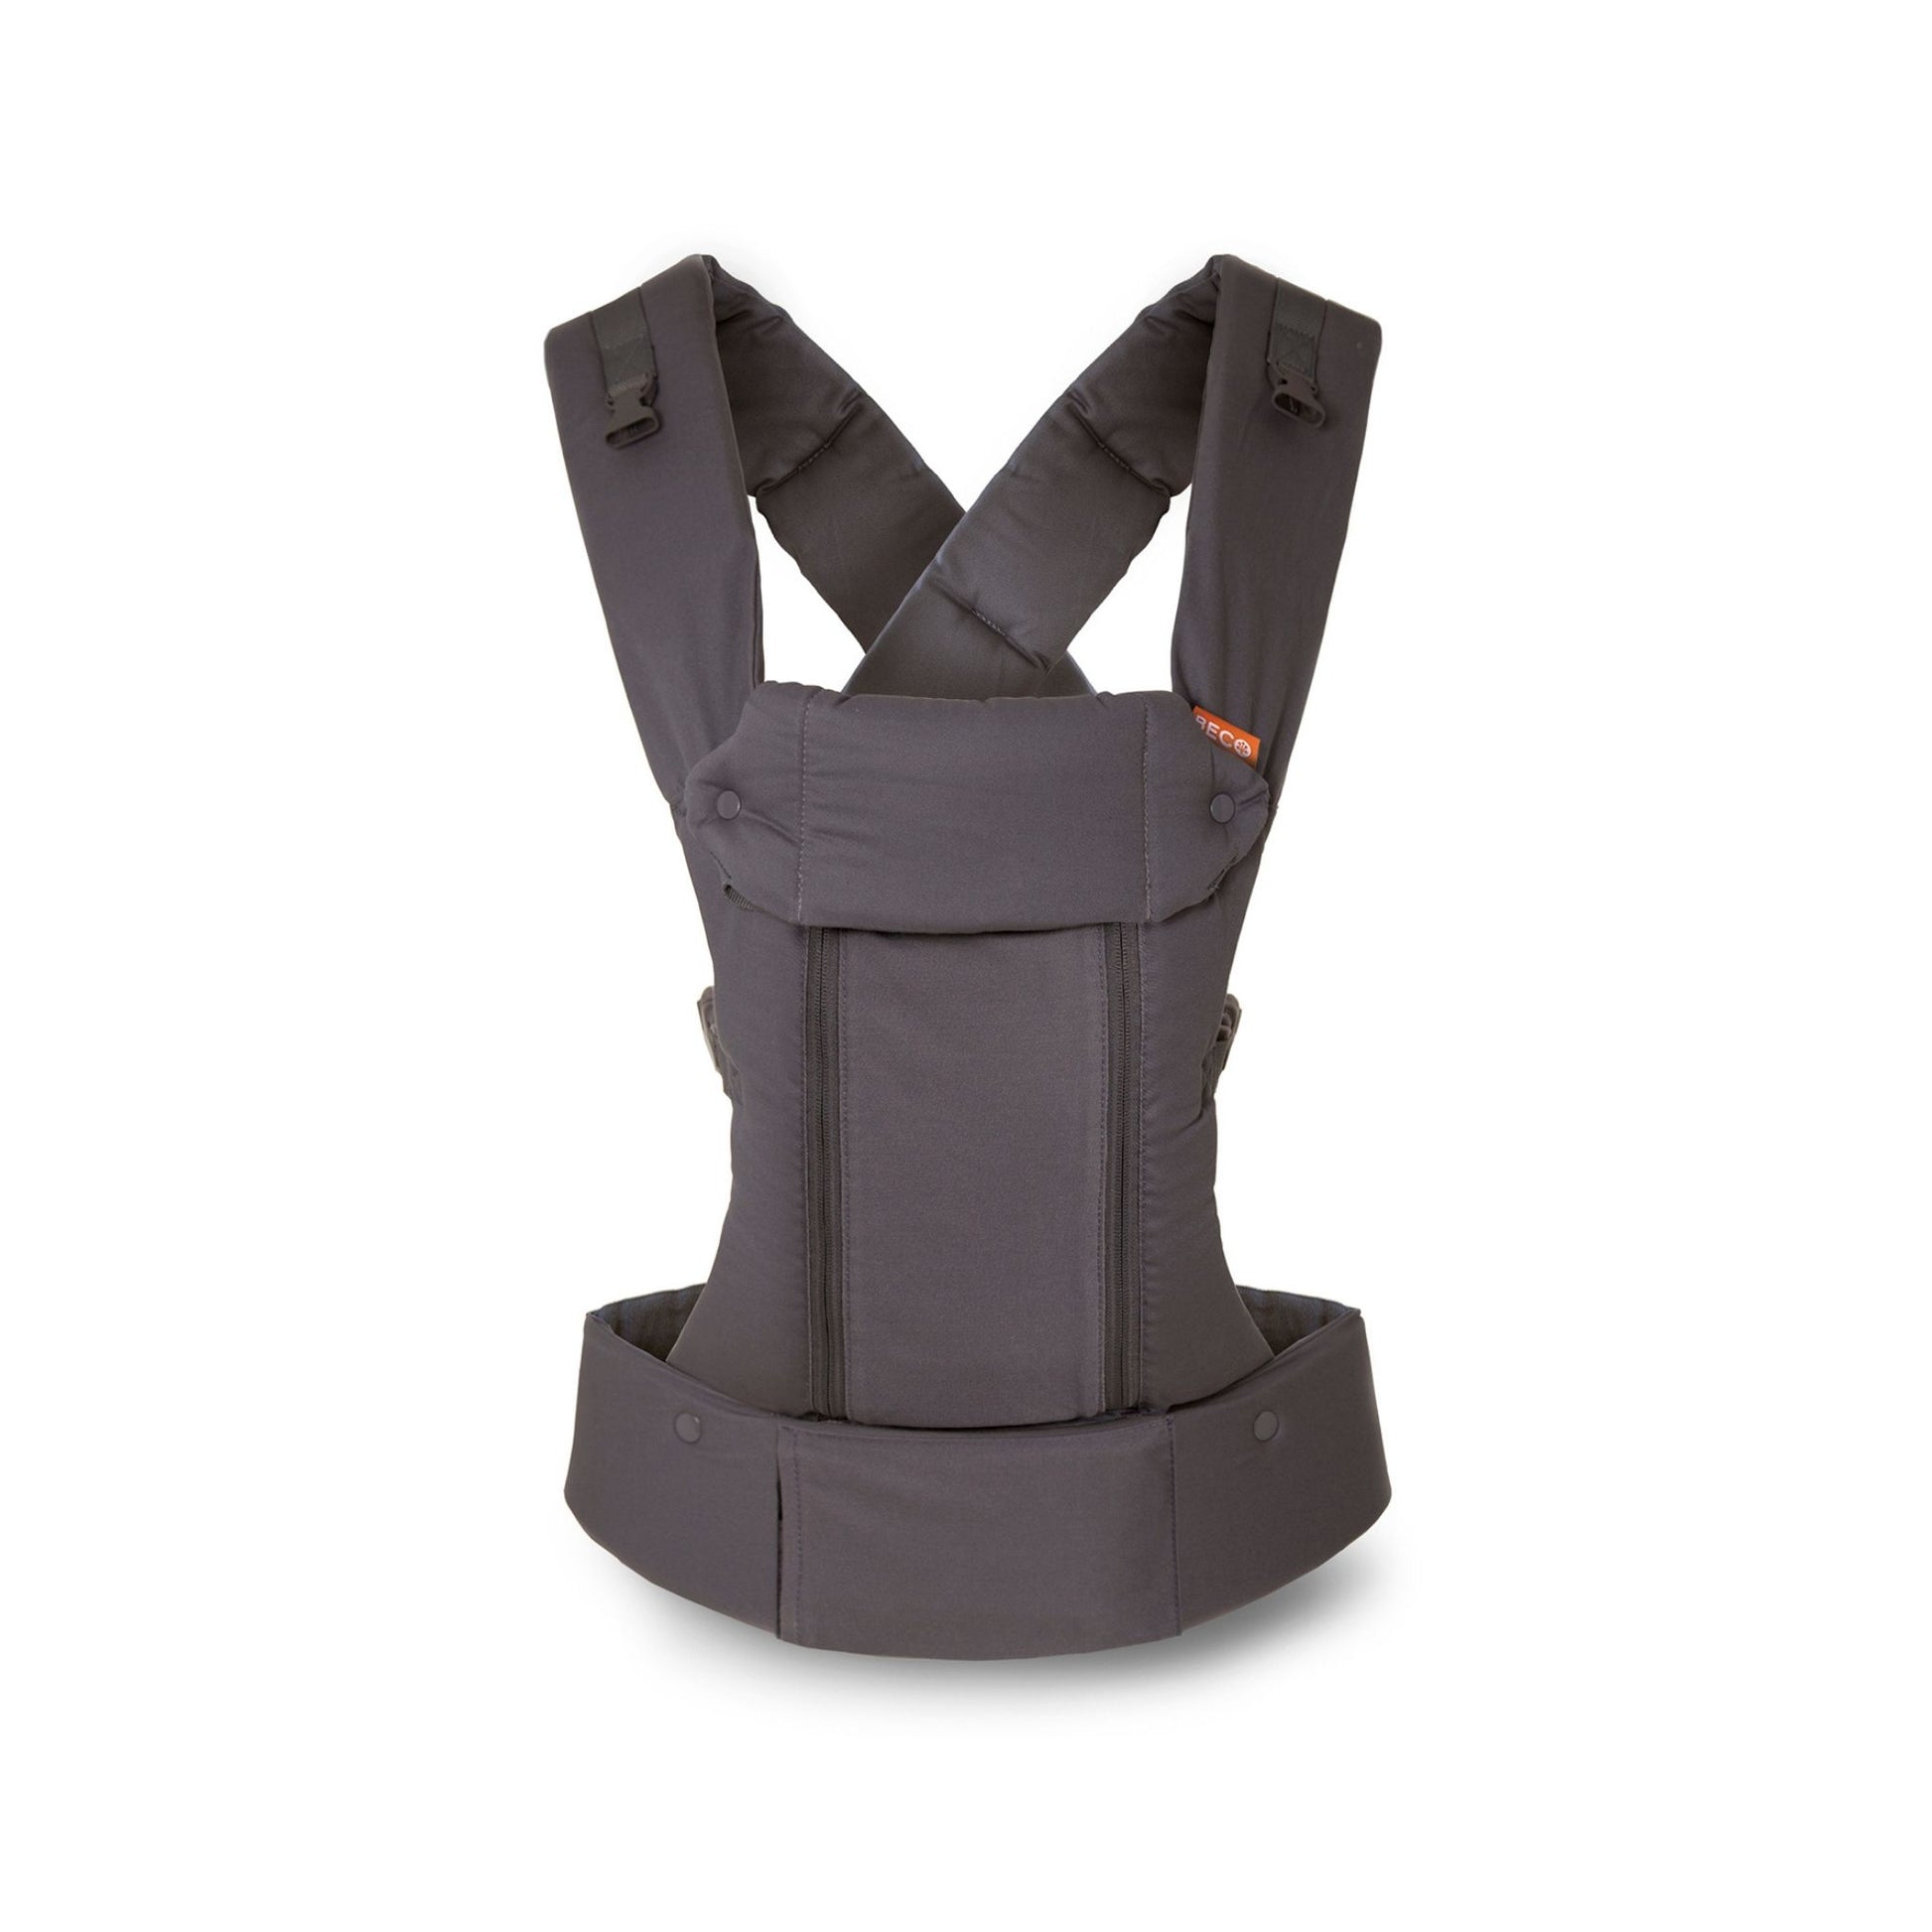 Product image of grey Beco8 baby carrier with back panel zipped up